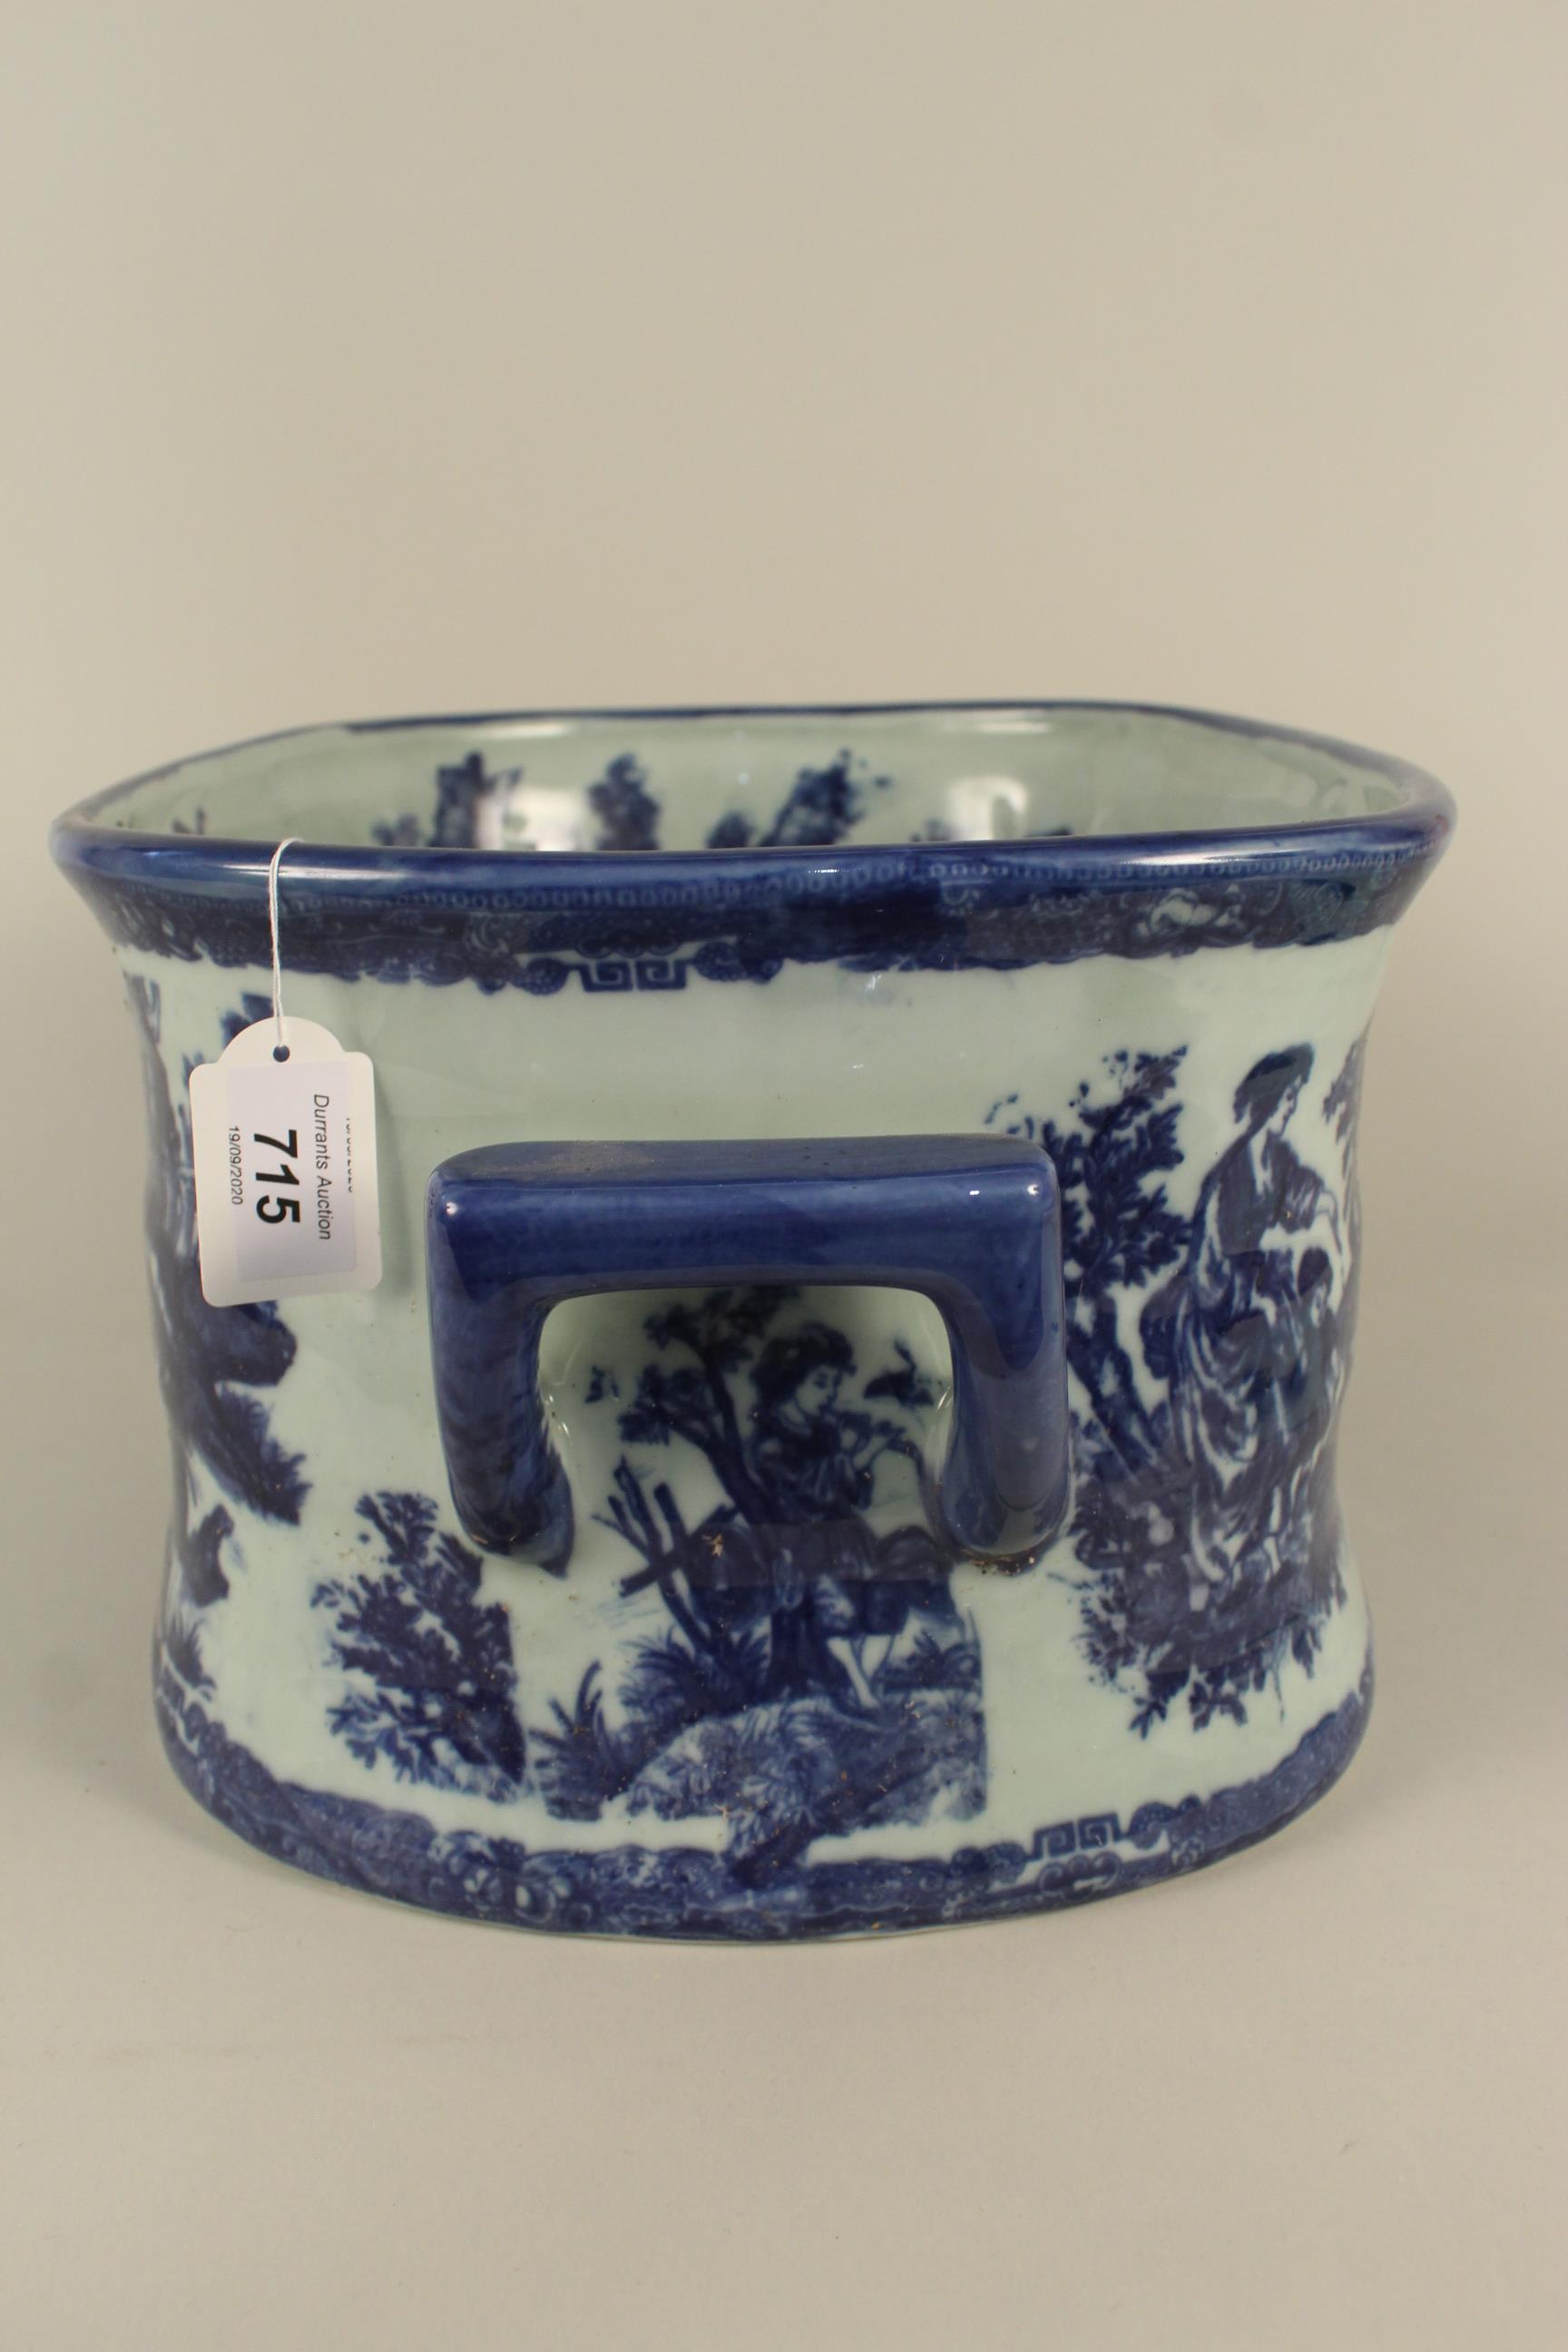 Blue and white slipper bath with classical scenes of figures in landscape, 18" wide, - Image 2 of 2